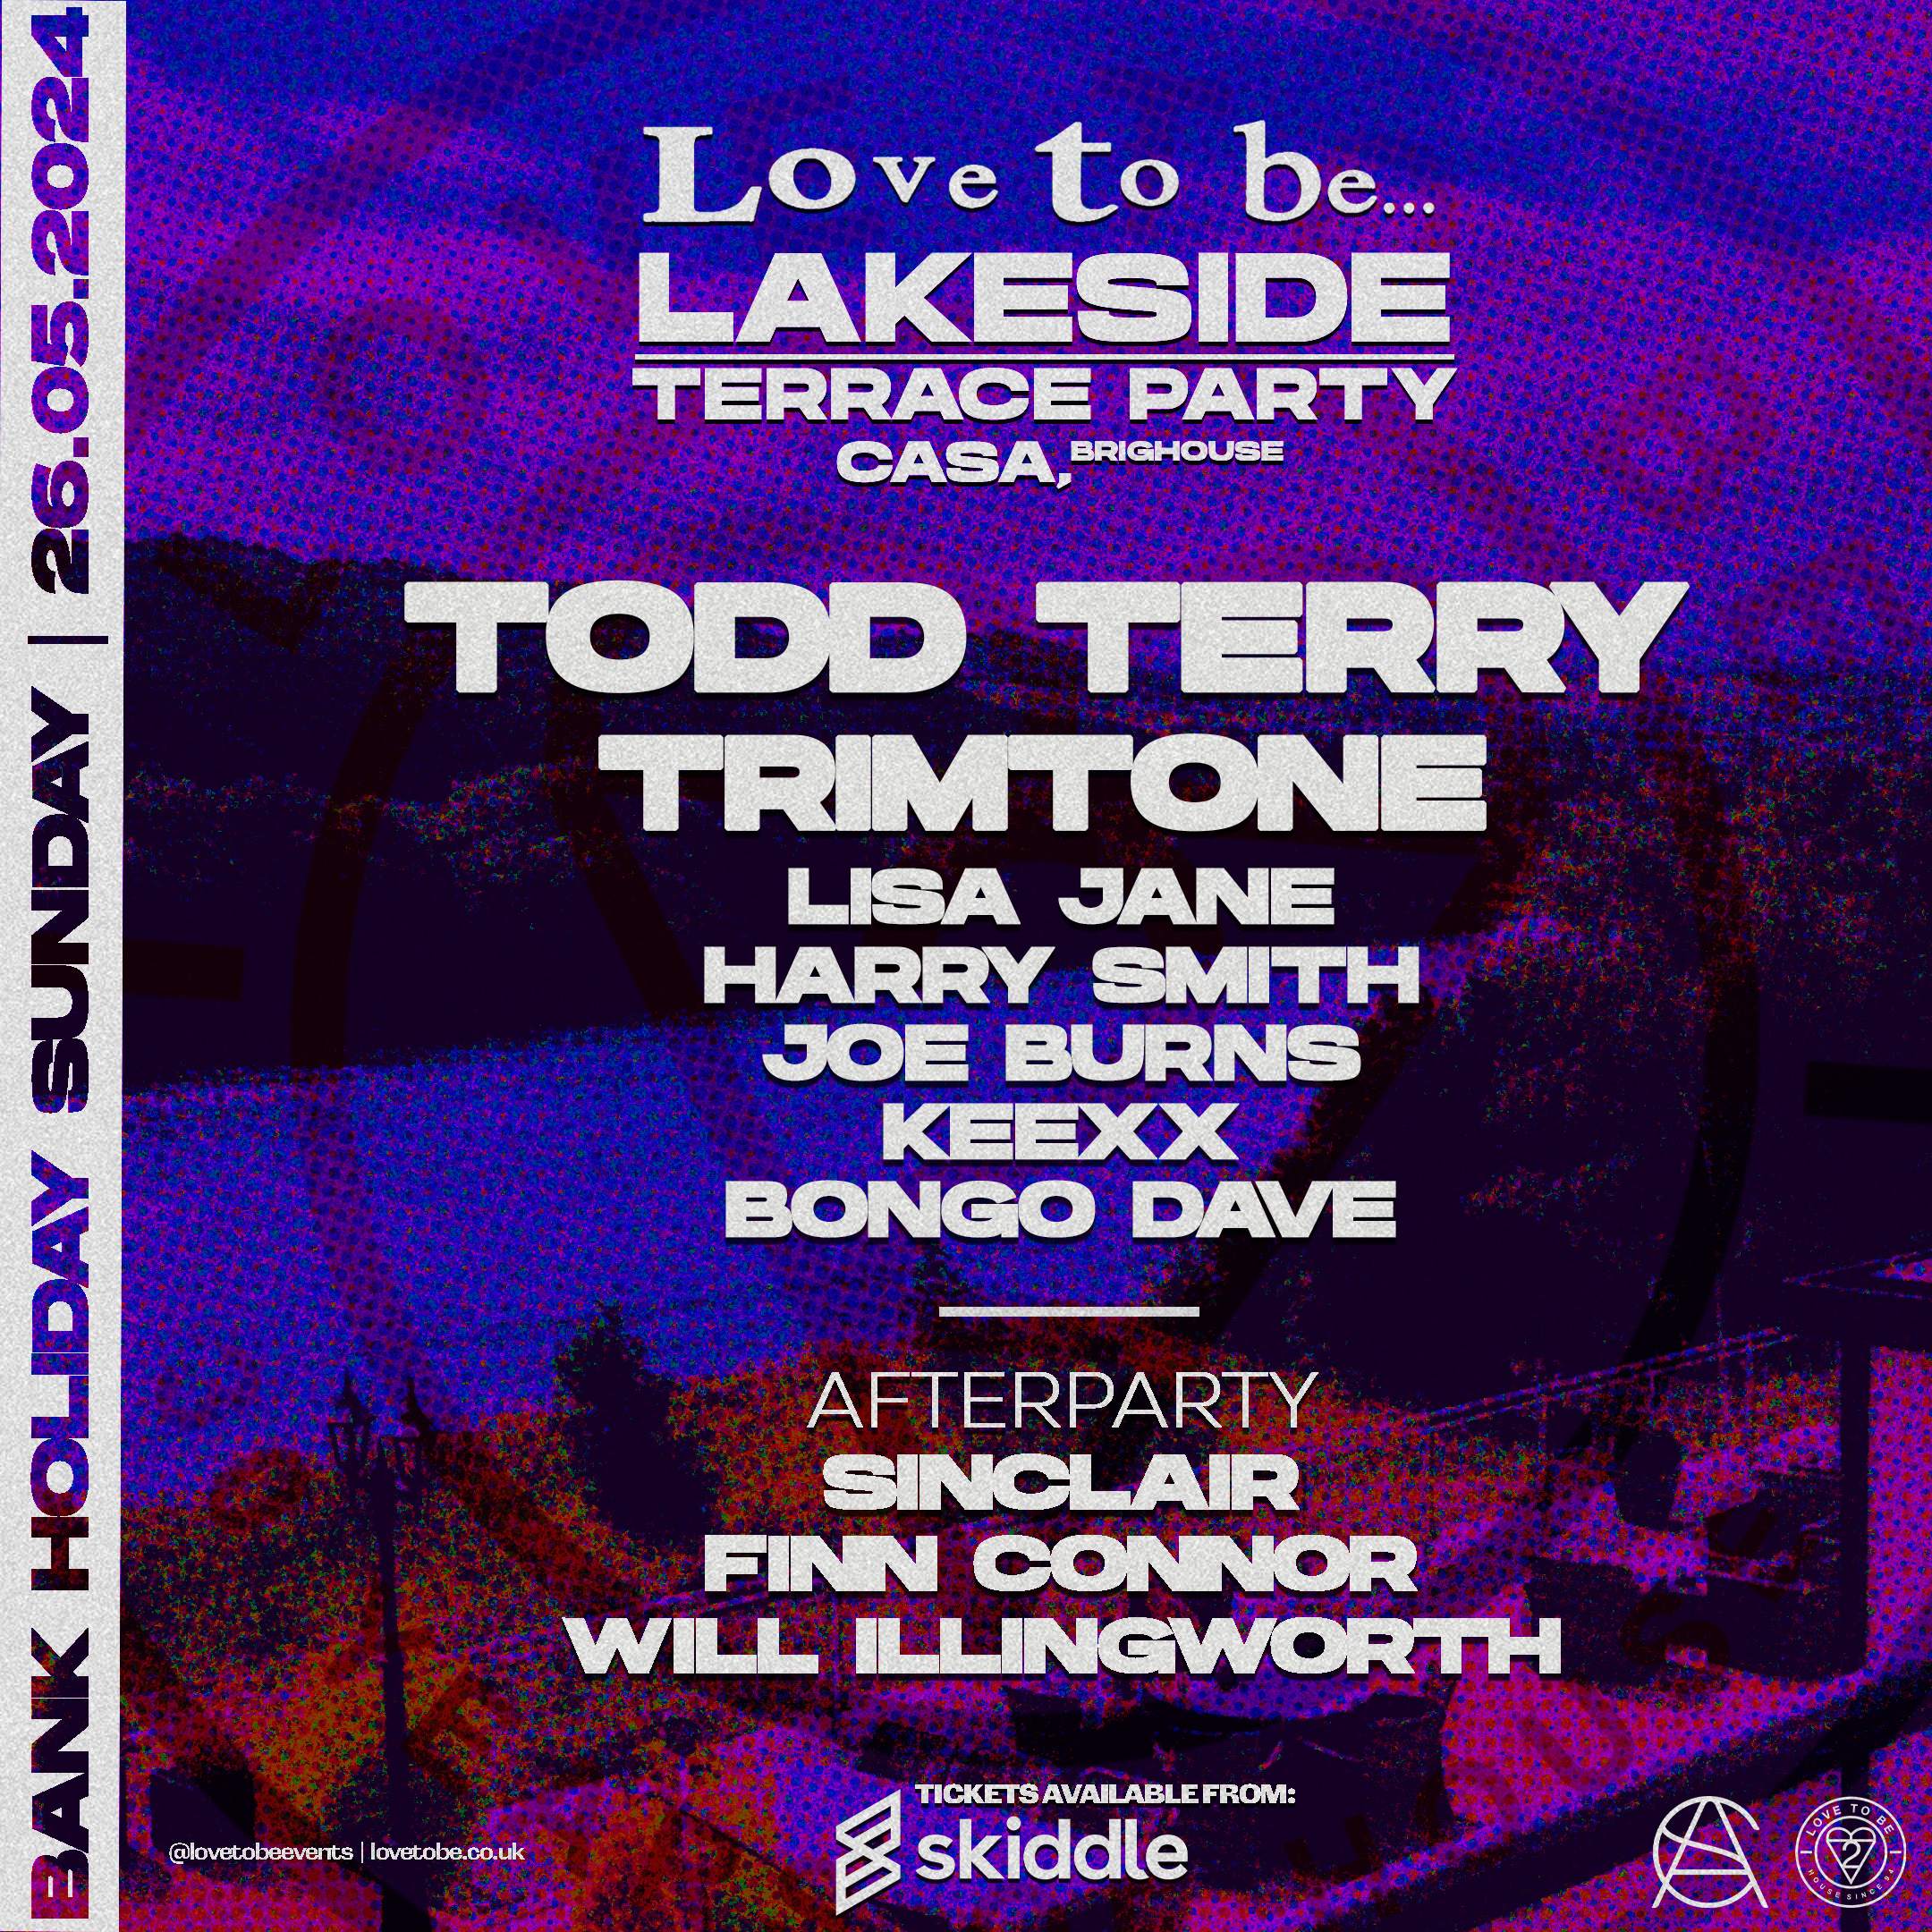 Love to be... Lakeside Terrace party with Todd Terry - フライヤー表